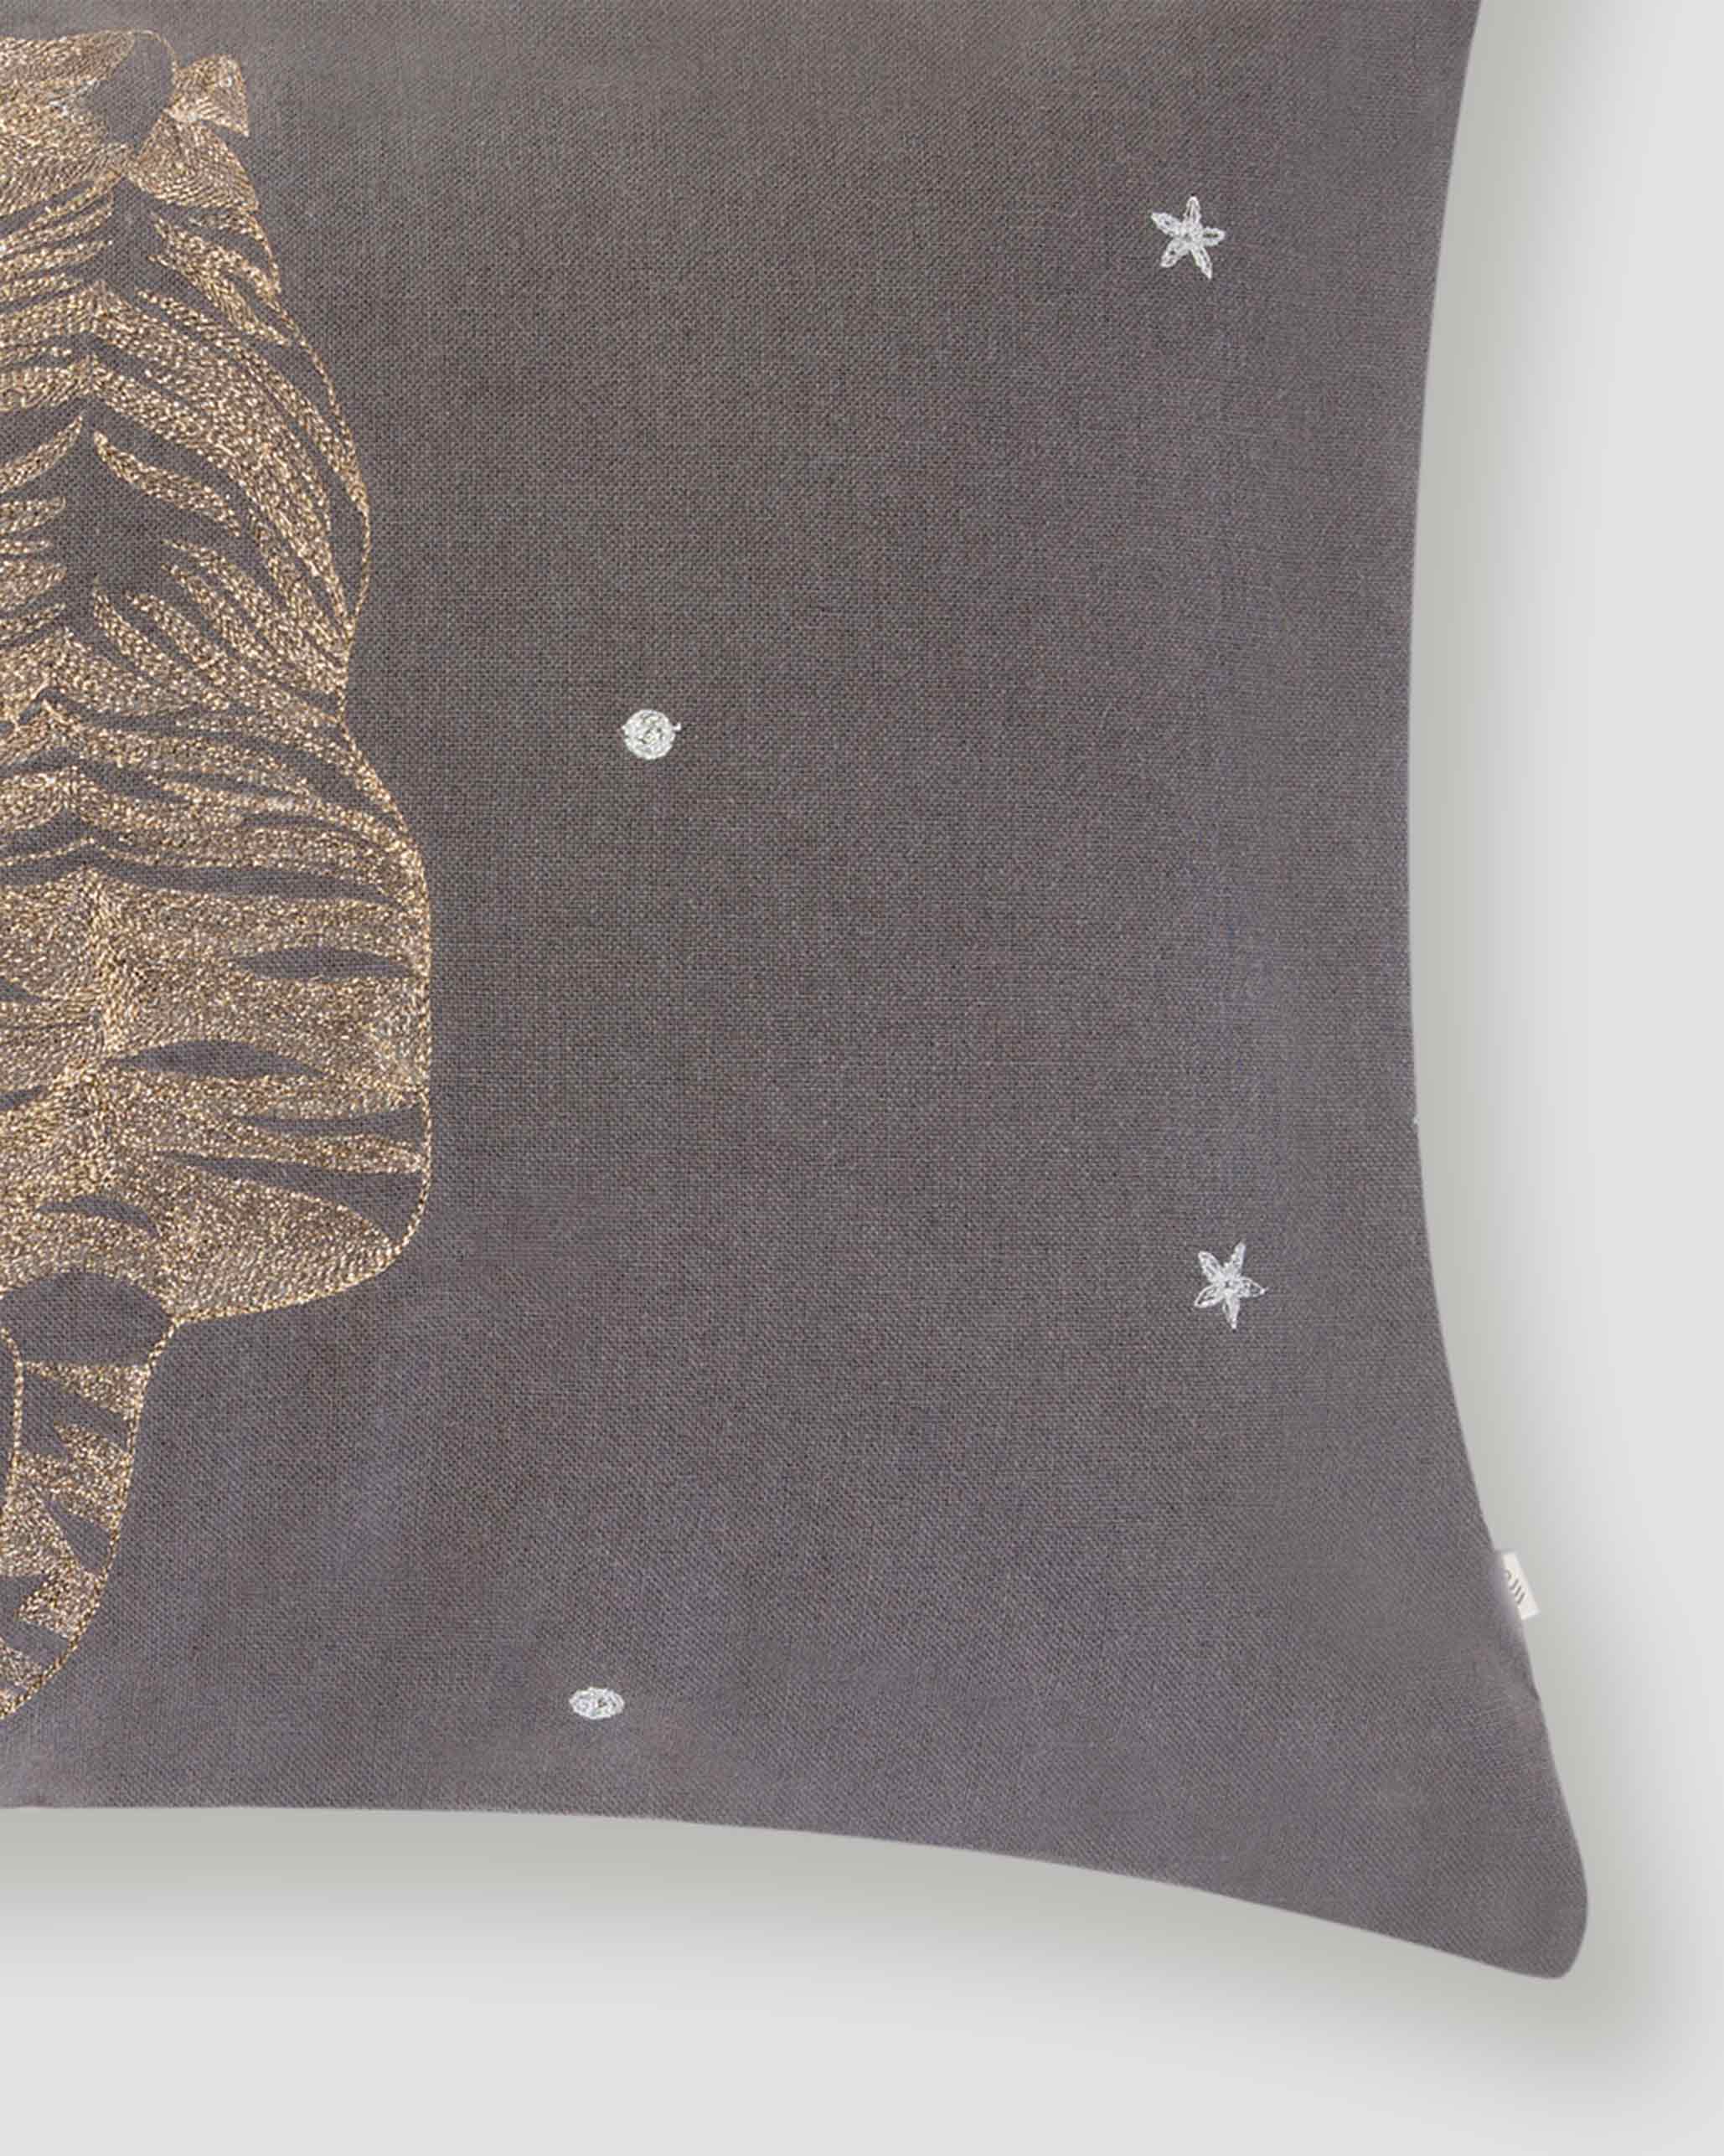 Sher Pillow Cover